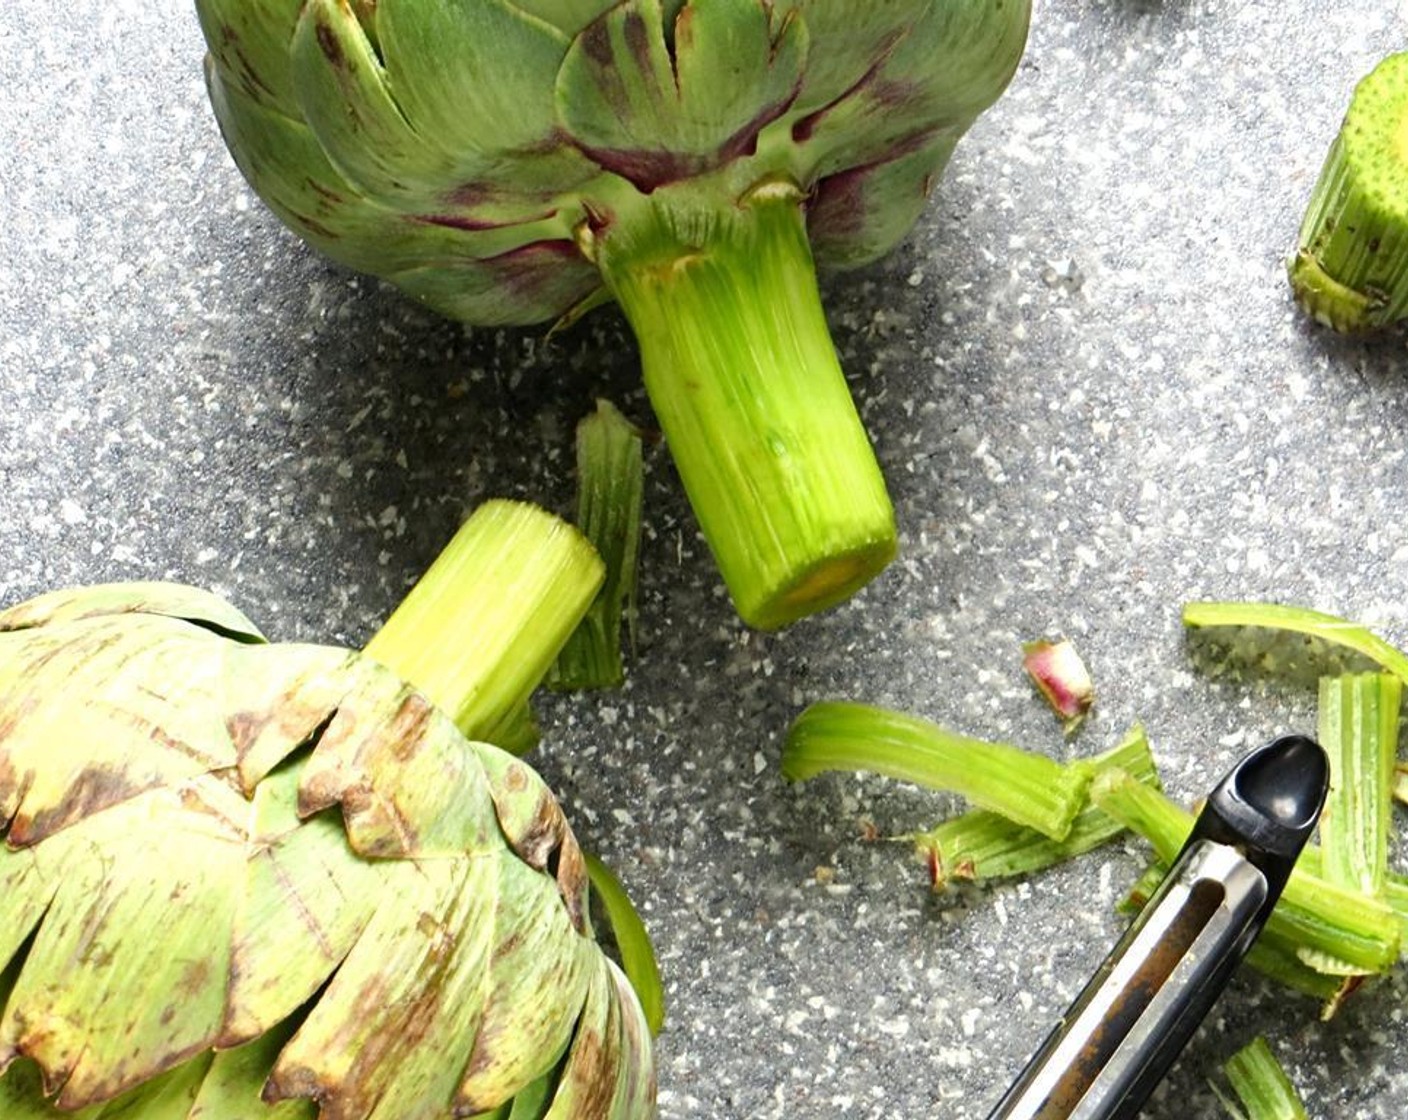 step 2 Meanwhile, prep the Artichokes (2): Remove any small leaves on the stem. Peel the stem using a sharp knife or vegetable peeler. Trim the stem, keeping about an inch or two on the artichoke. Discard the remnants.